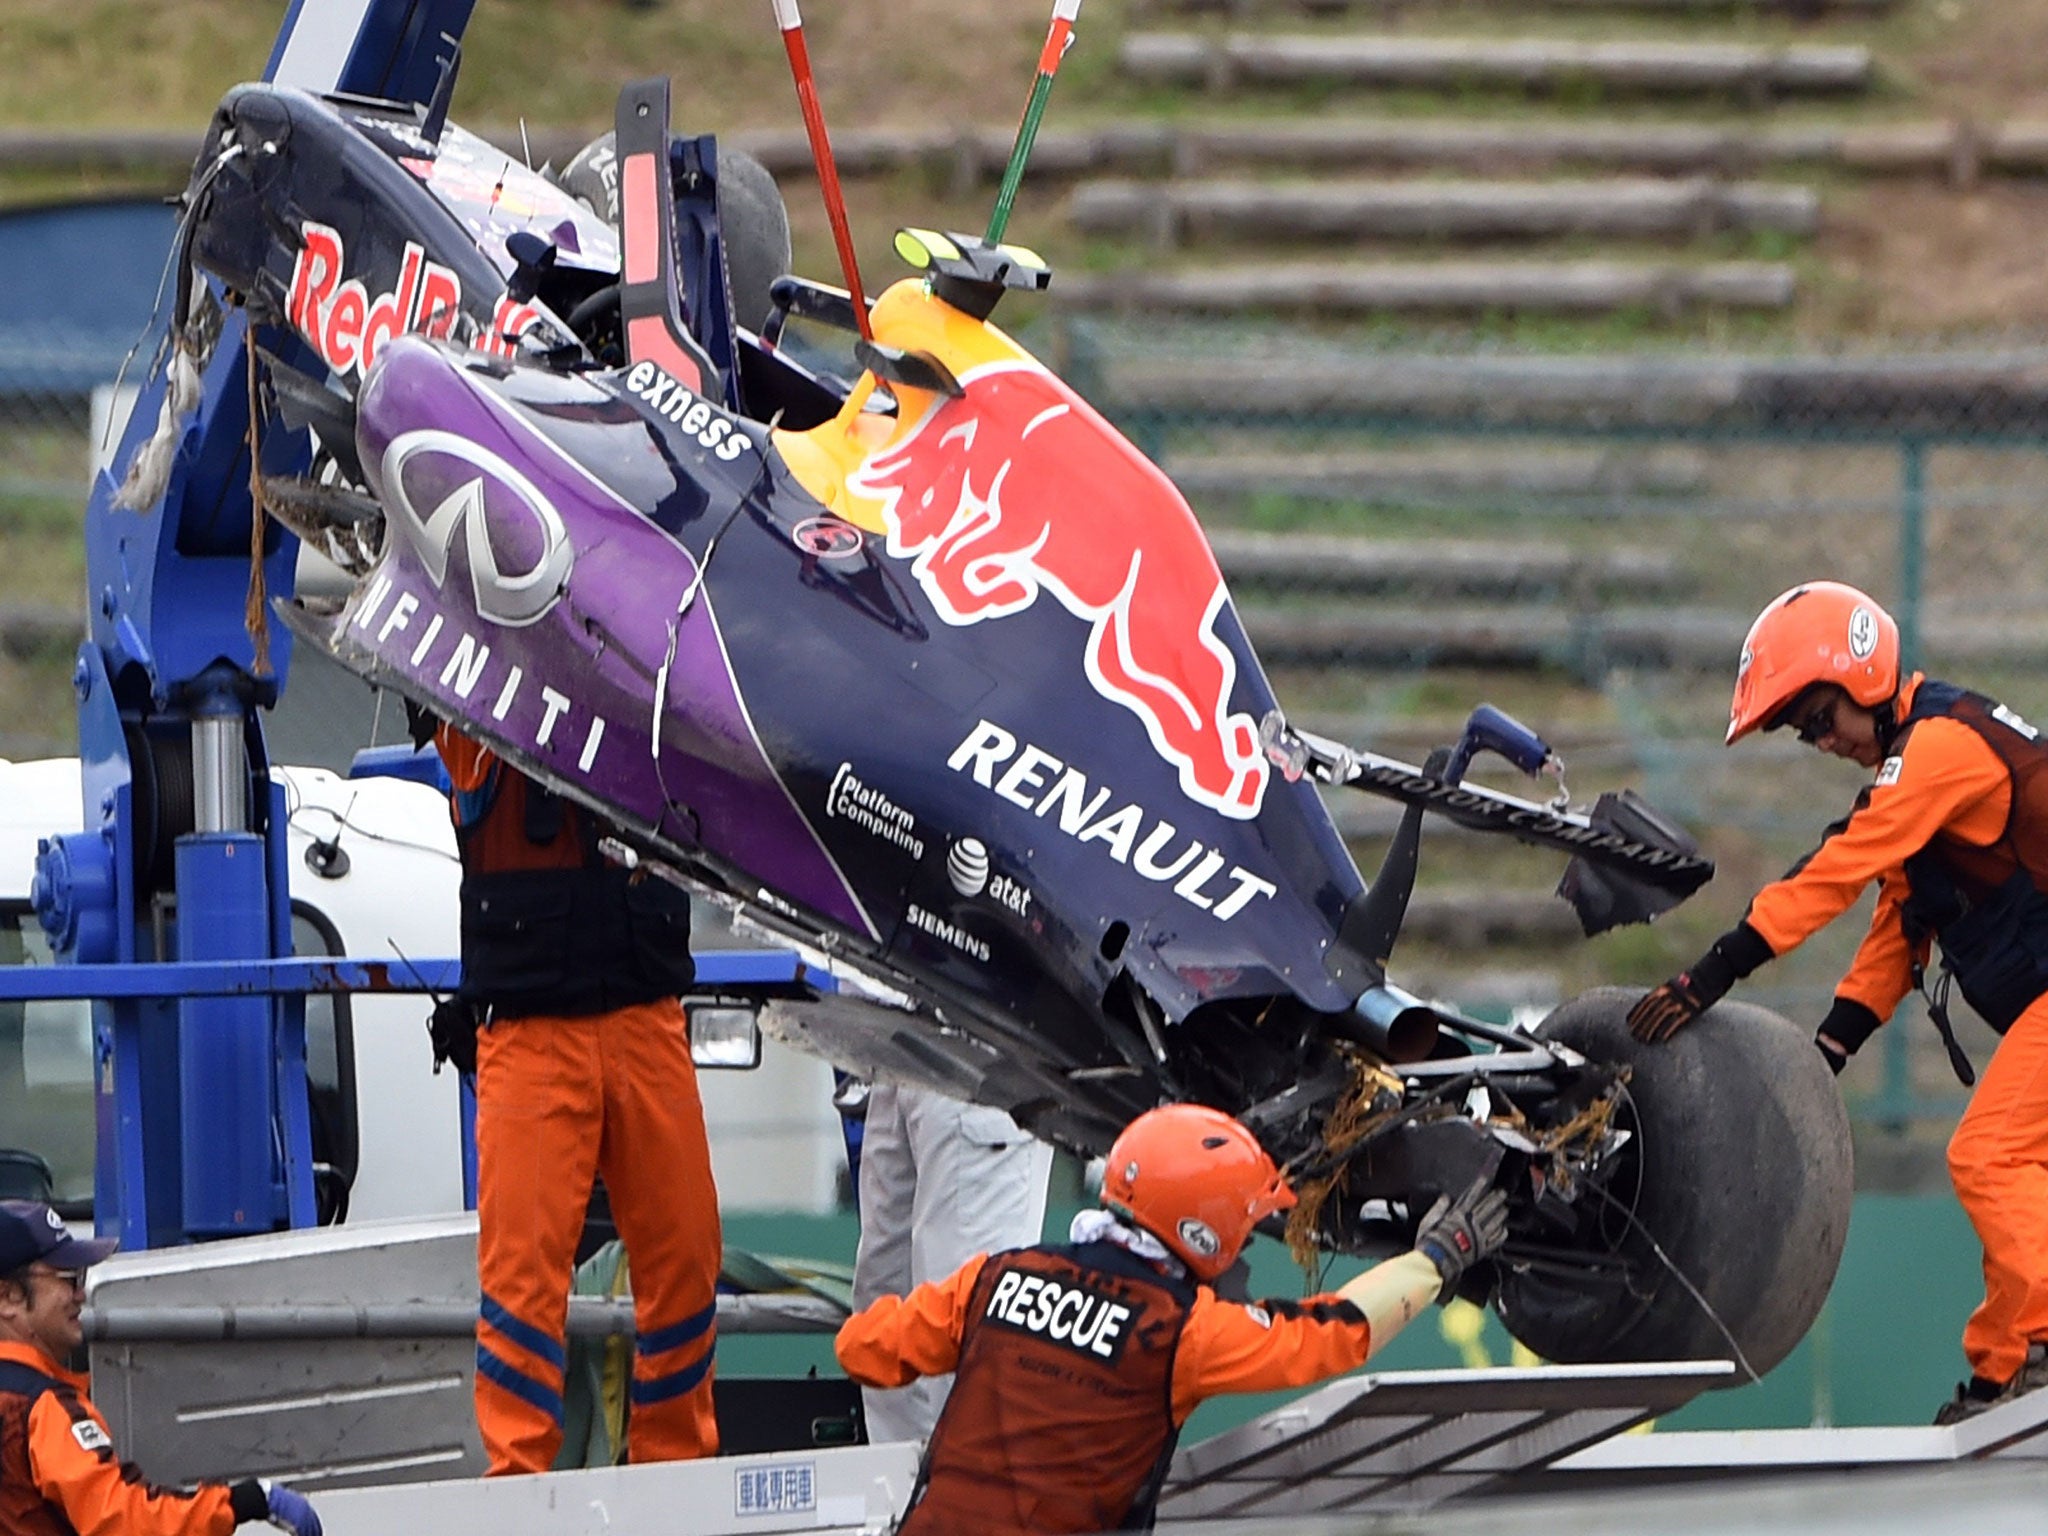 Daniil Kvyat's Red Bull is retrieved after a heavy accident